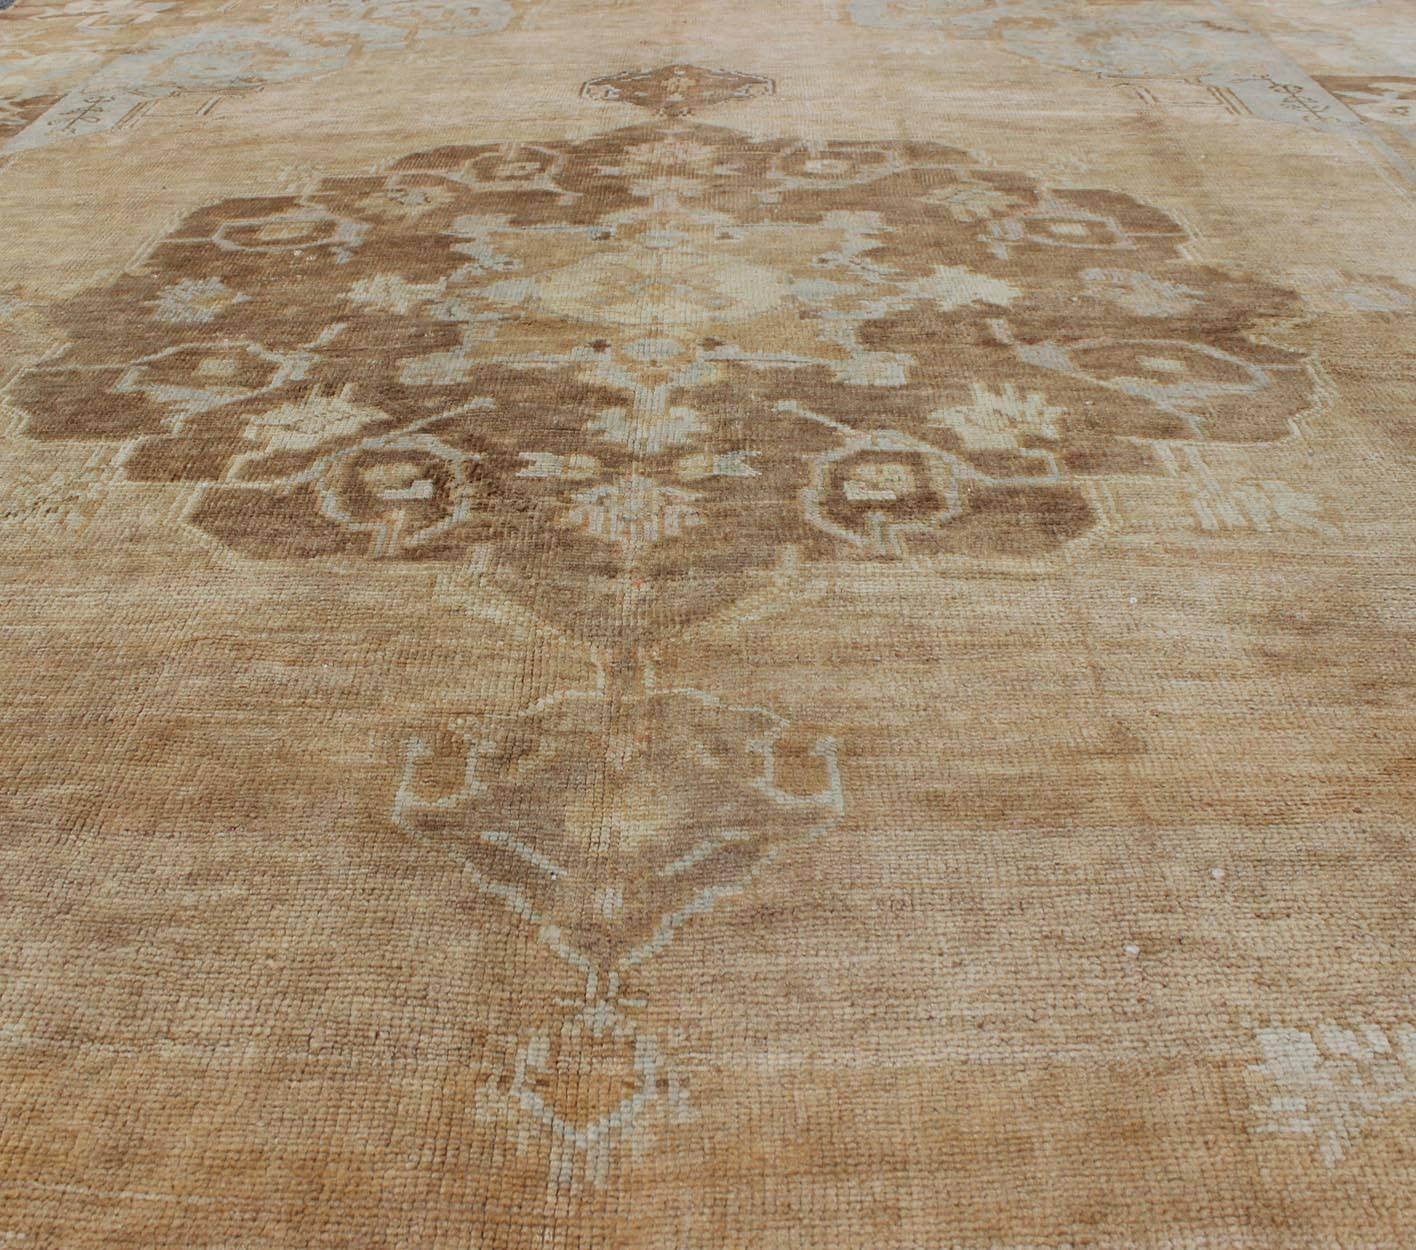 Mid-20th Century Vintage Turkish Kars Rug with Floral Medallion in Camel, Tan, Taupe and Gray For Sale